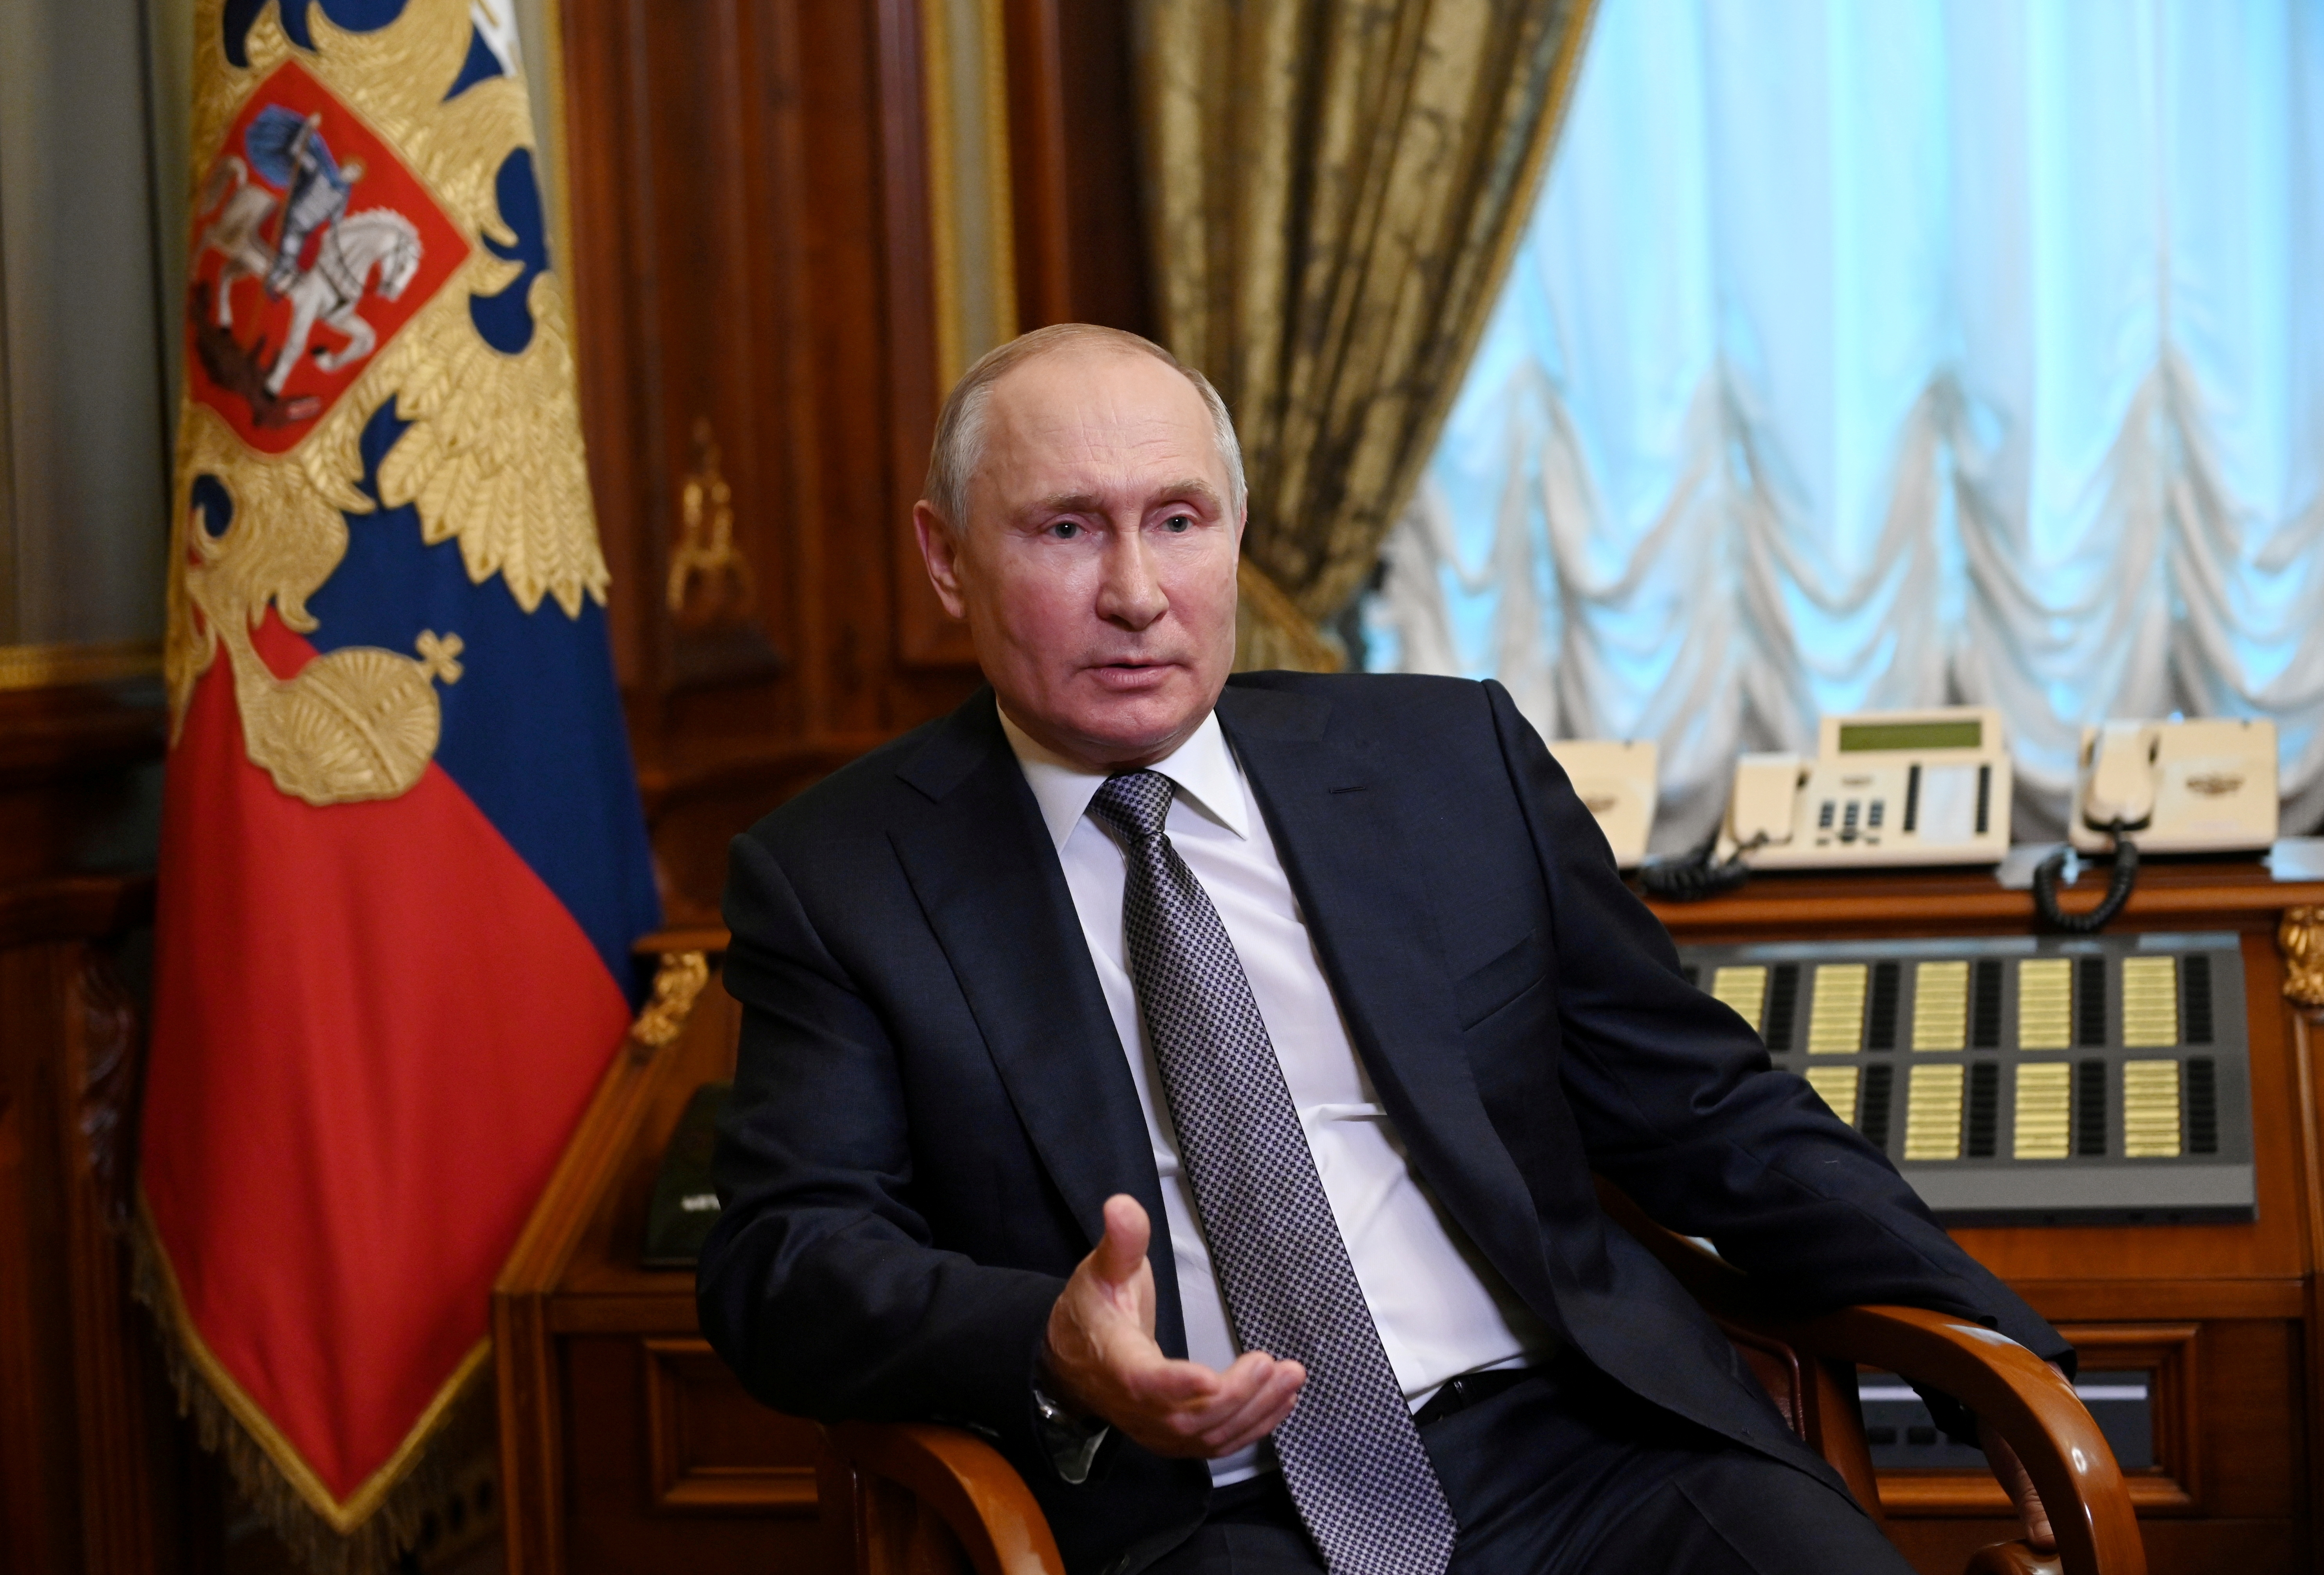 Russian President Putin answers questions about his article 